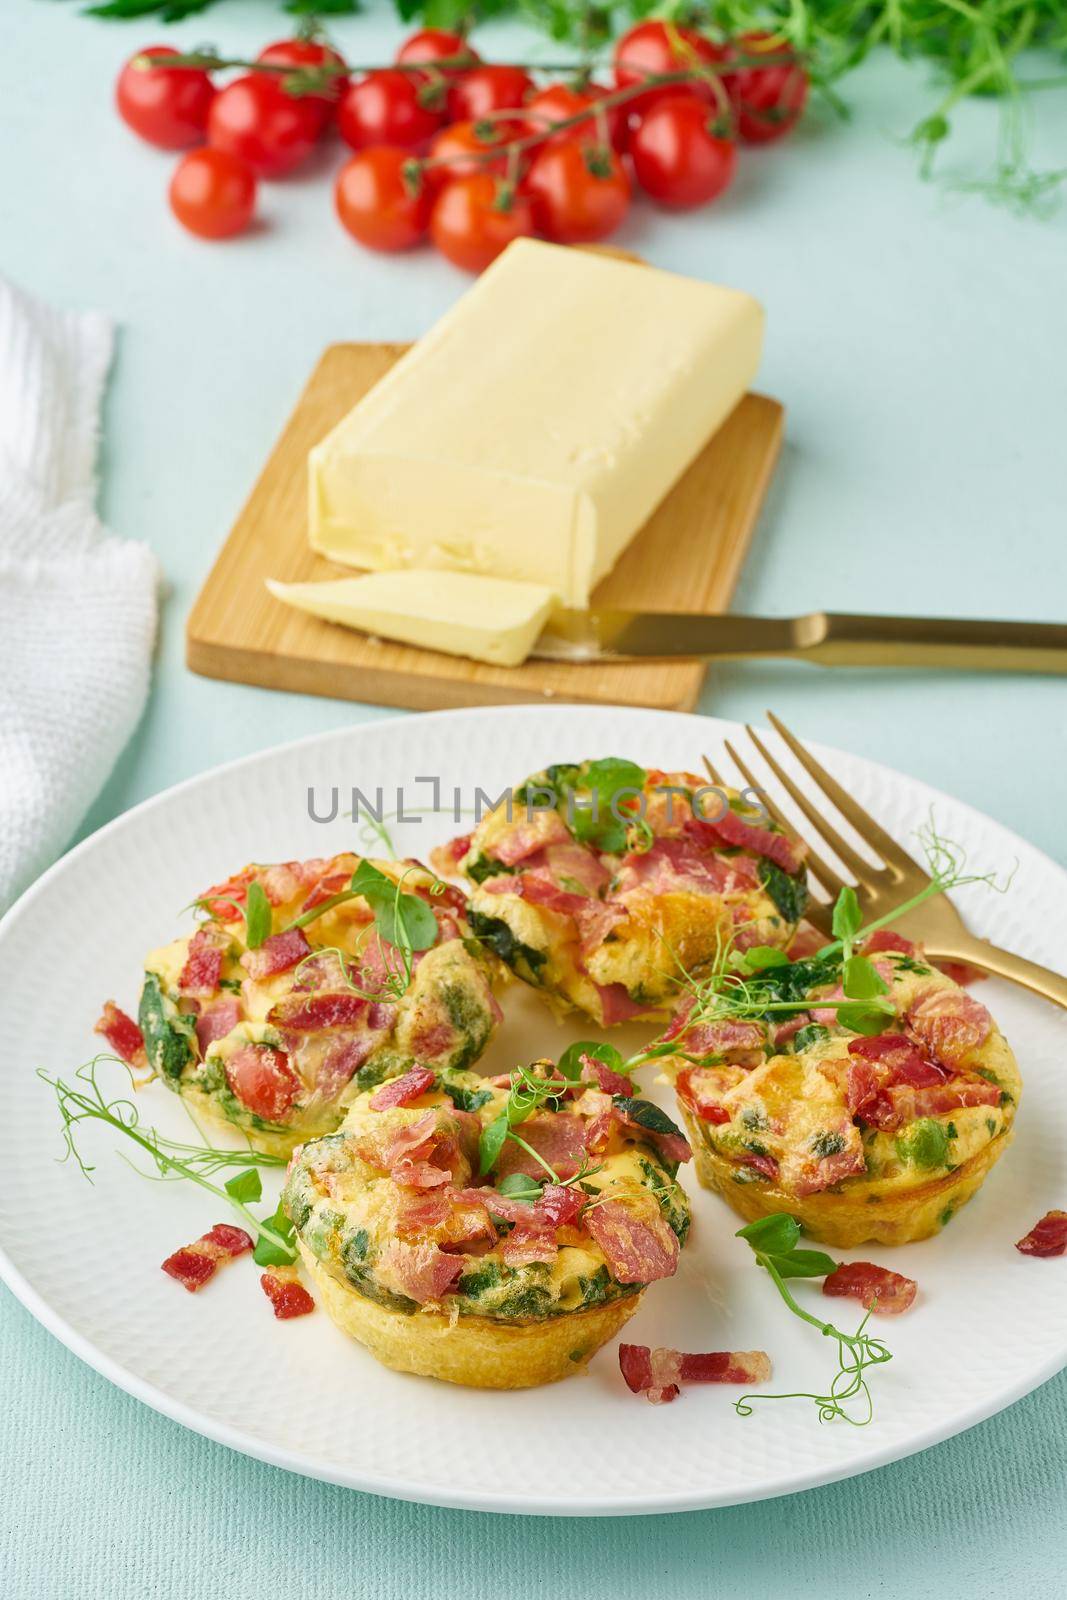 egg muffins with spinach, bacon and tomato, ketogenic keto diet low carb, pastel and modern background closeup vertical